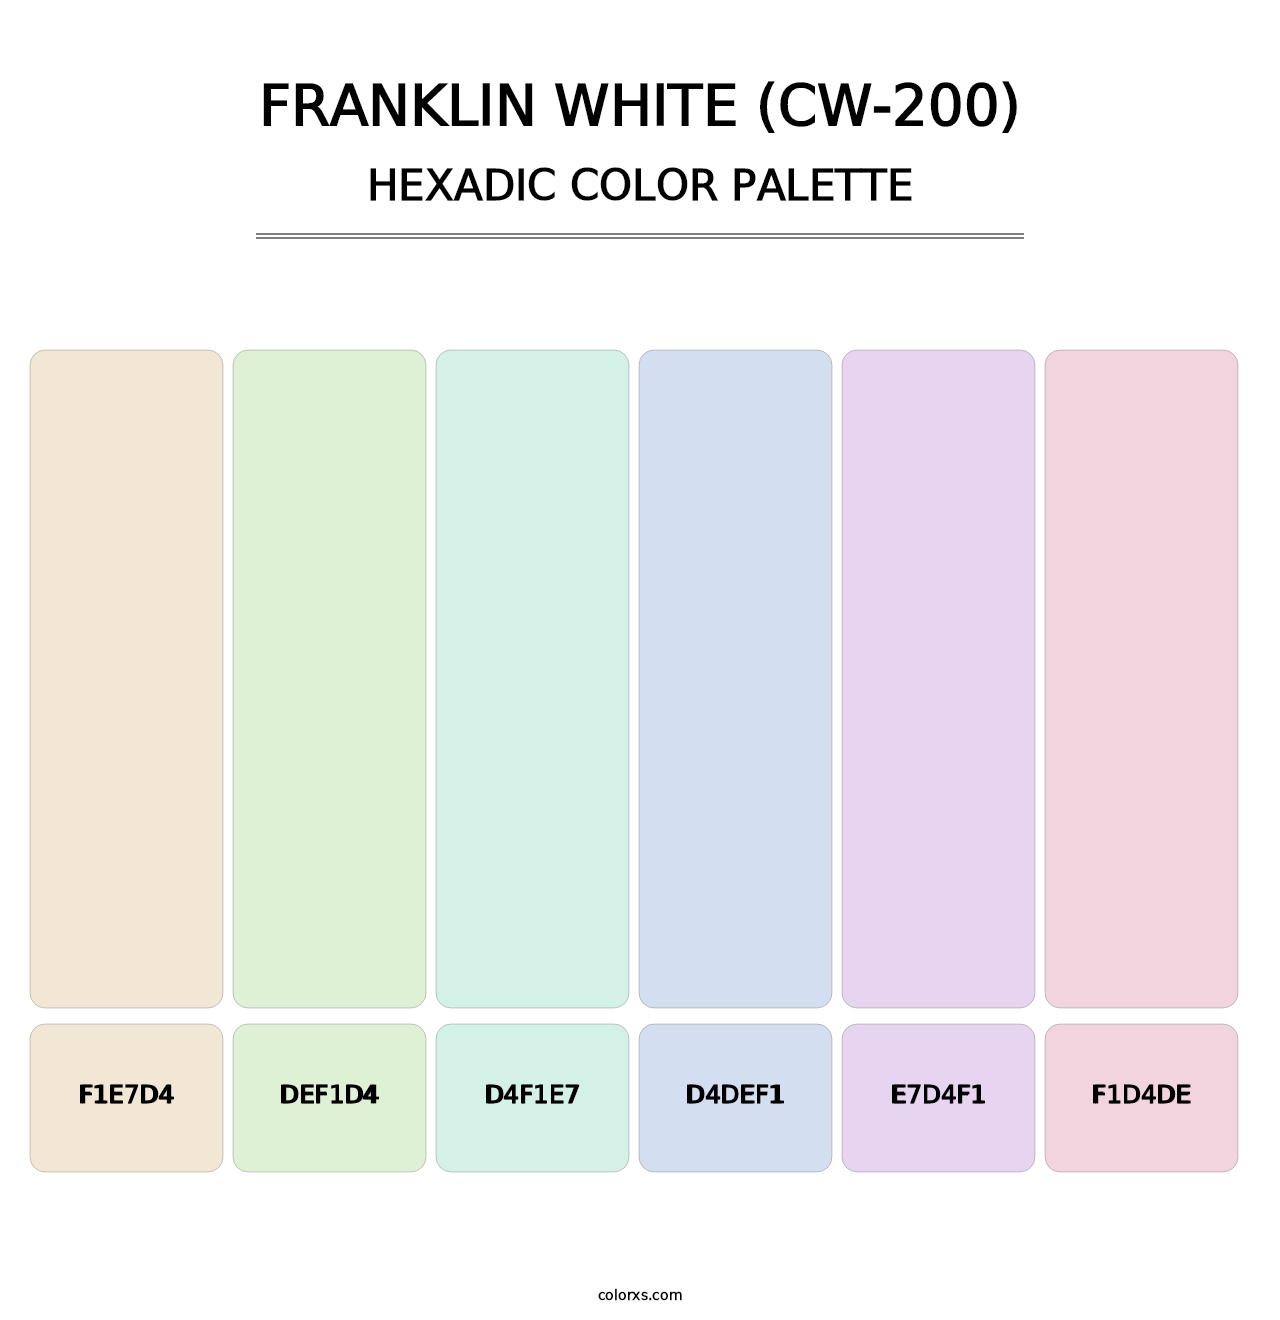 Franklin White (CW-200) - Hexadic Color Palette